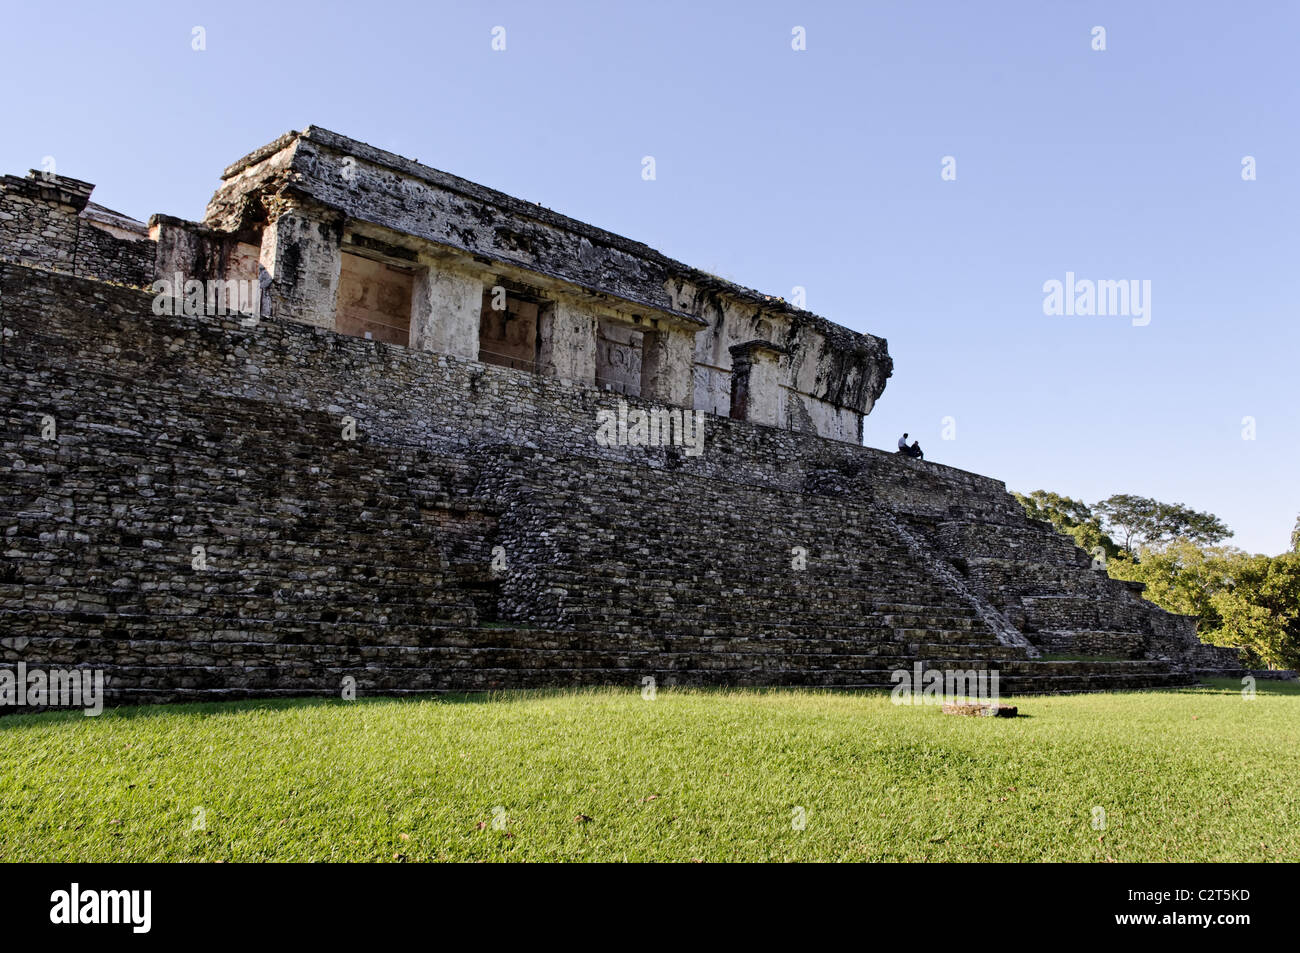 Detail of El Palacio (The Palace) a group of interconnected buildings in Palenque, Mexico. Stock Photo